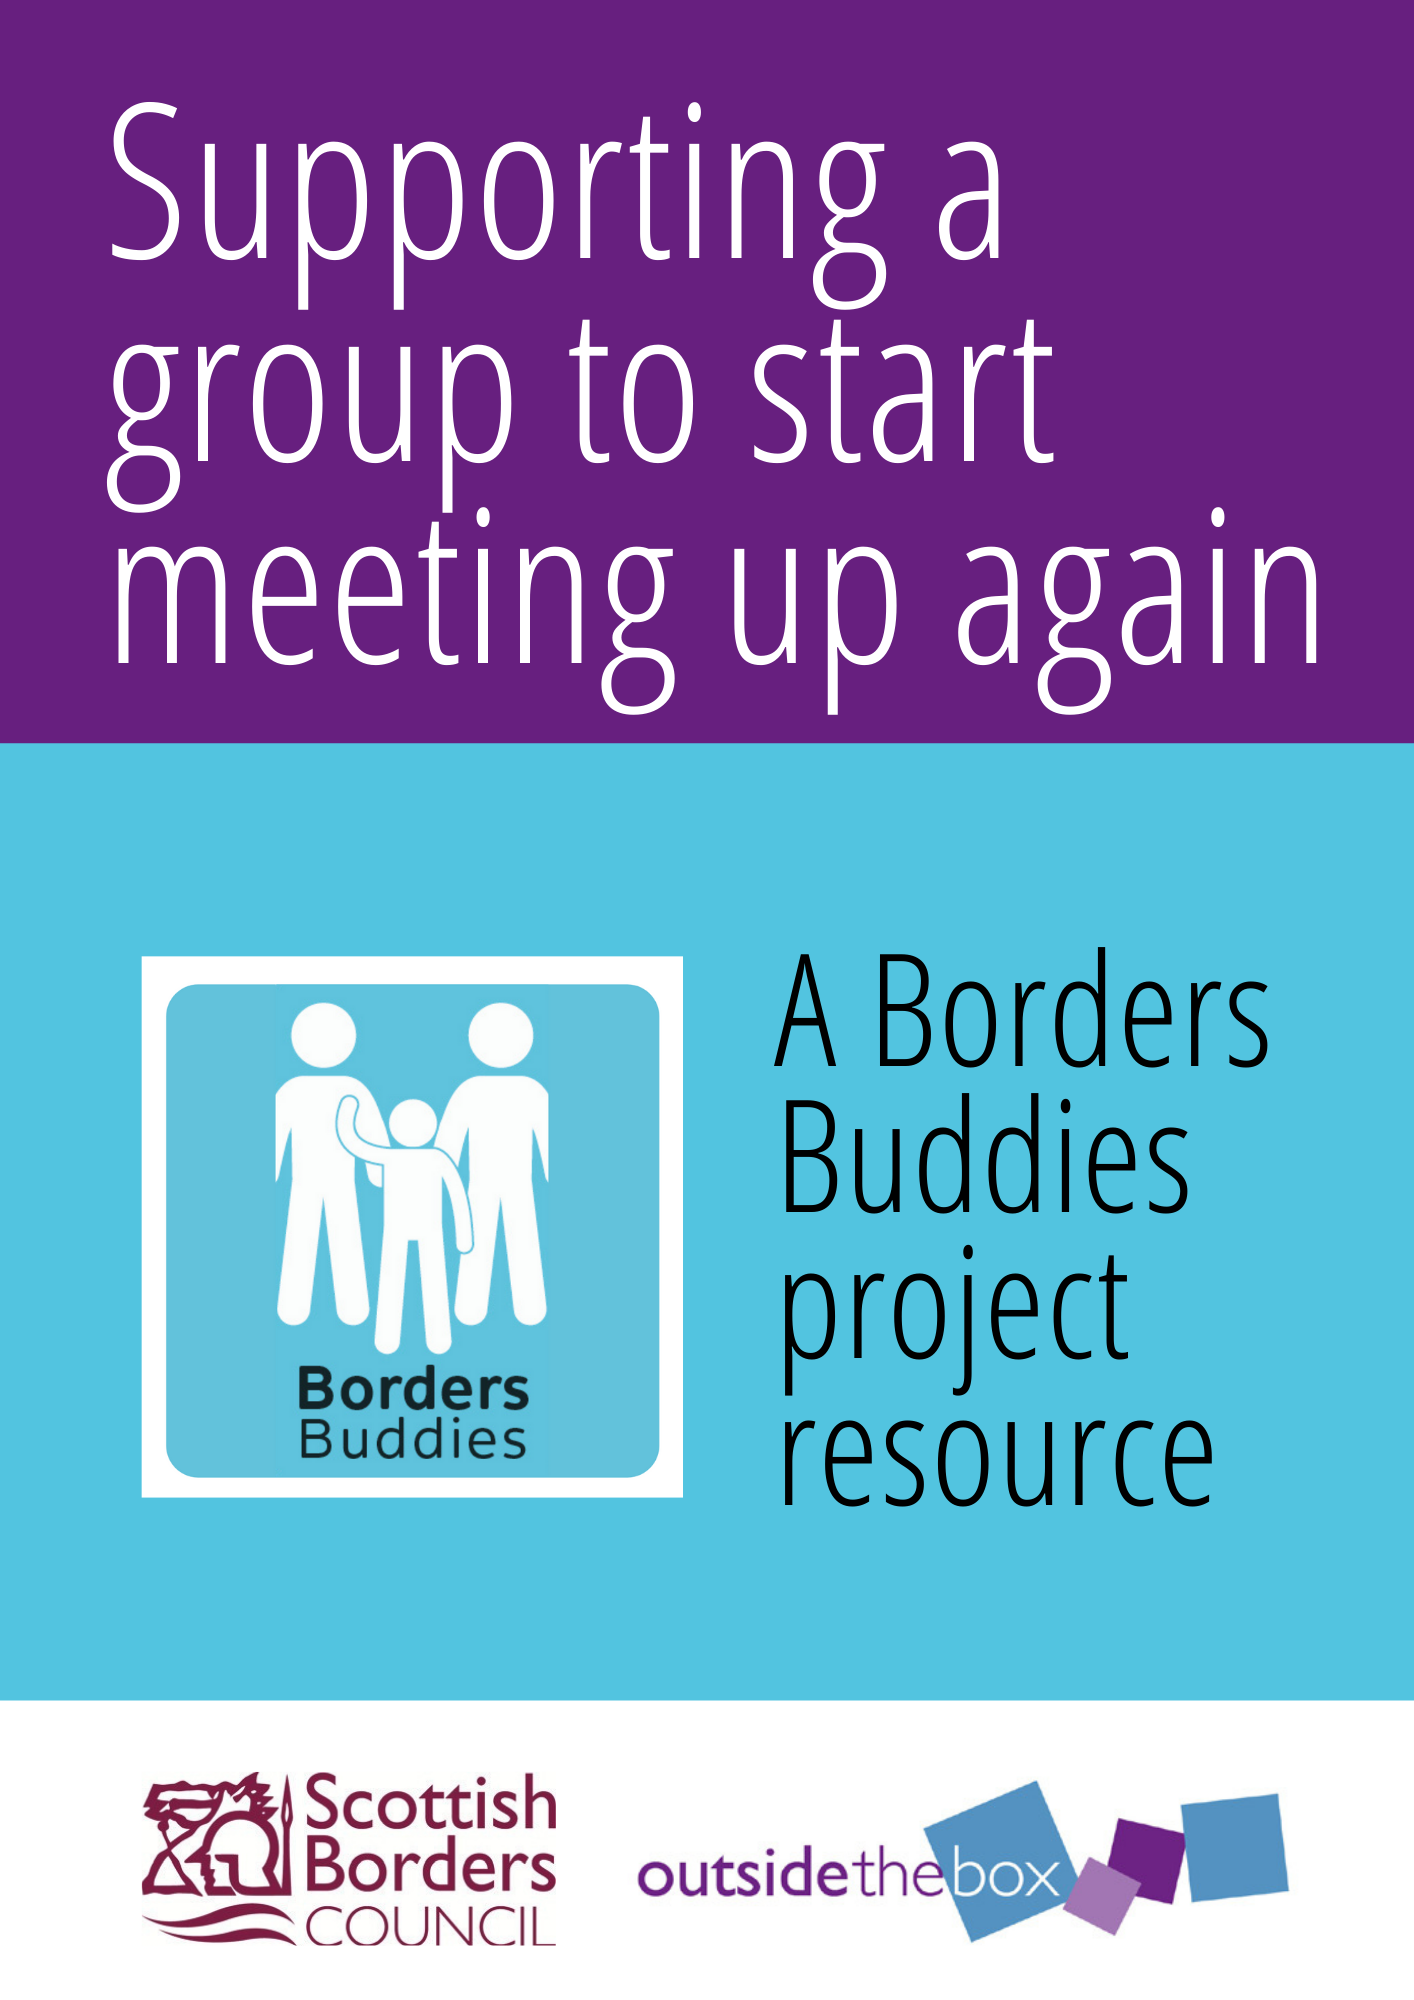 Supporting a group to start meeting up again - a Borders Buddies project resource